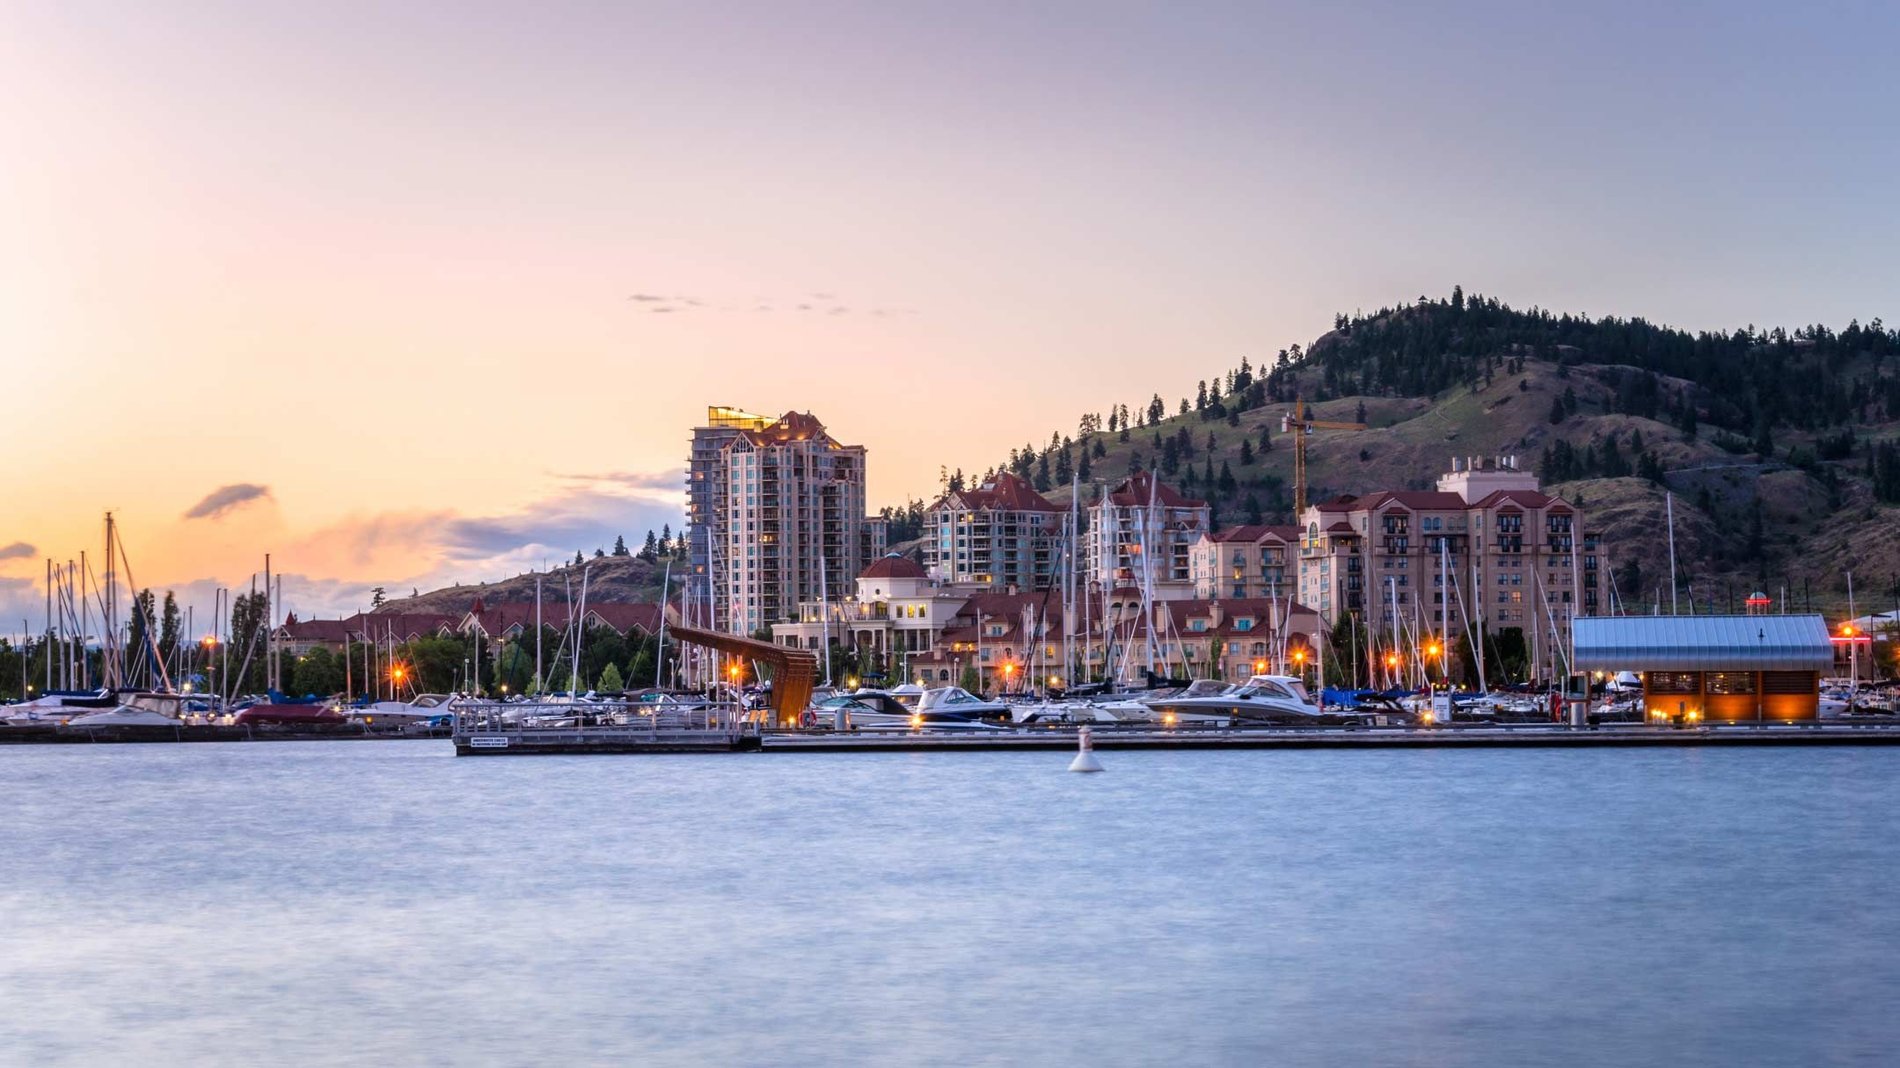 Sunset view of Kelowna's water front